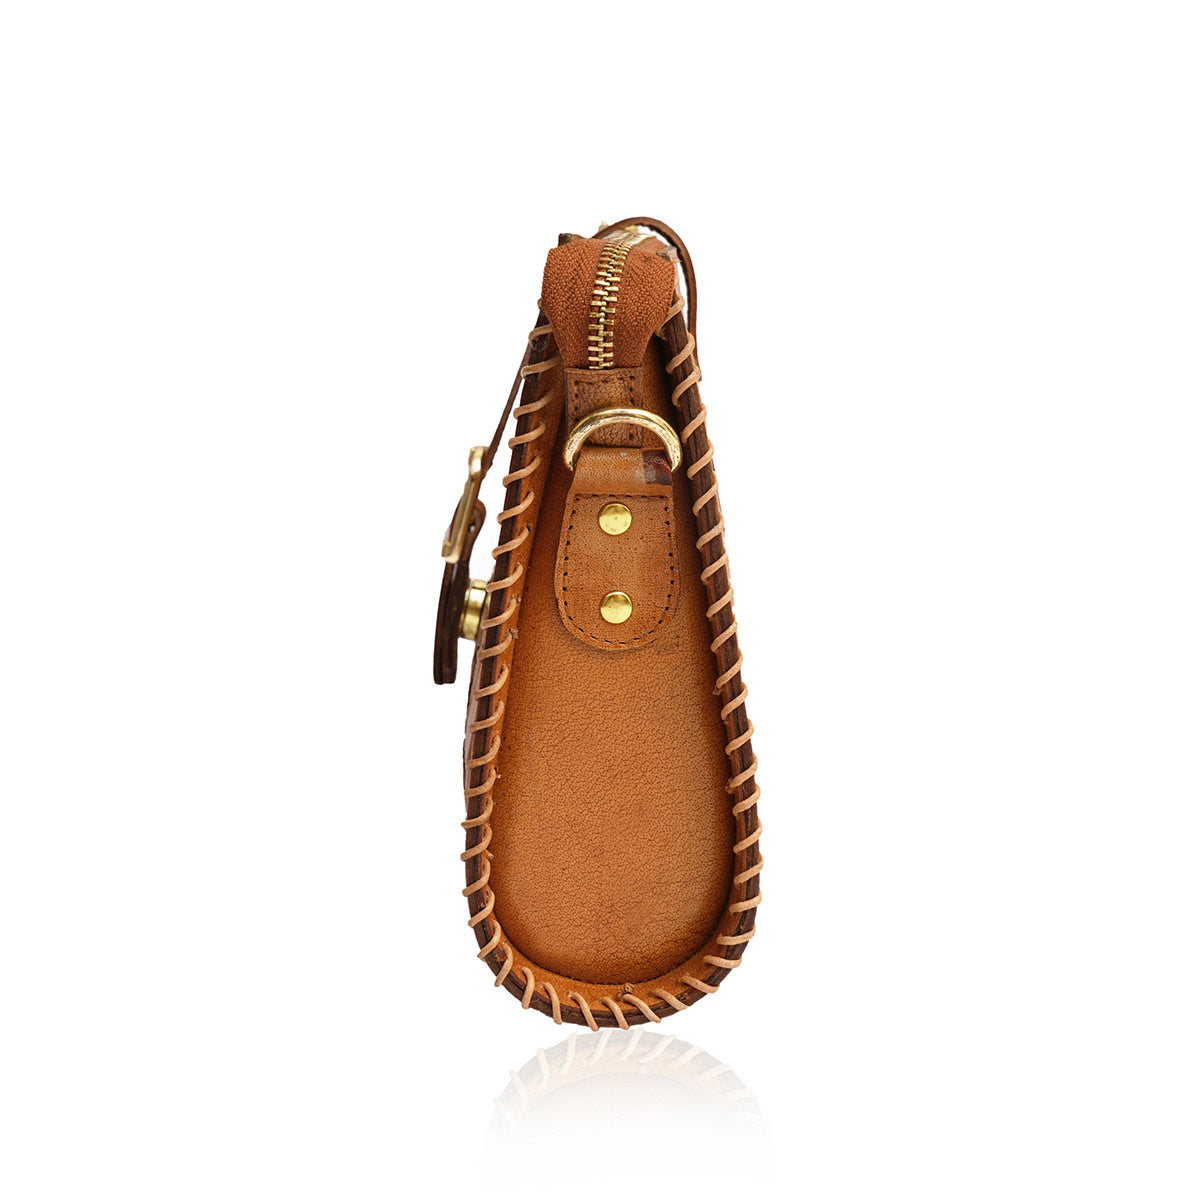 BloomFly- Leather Sling Bag